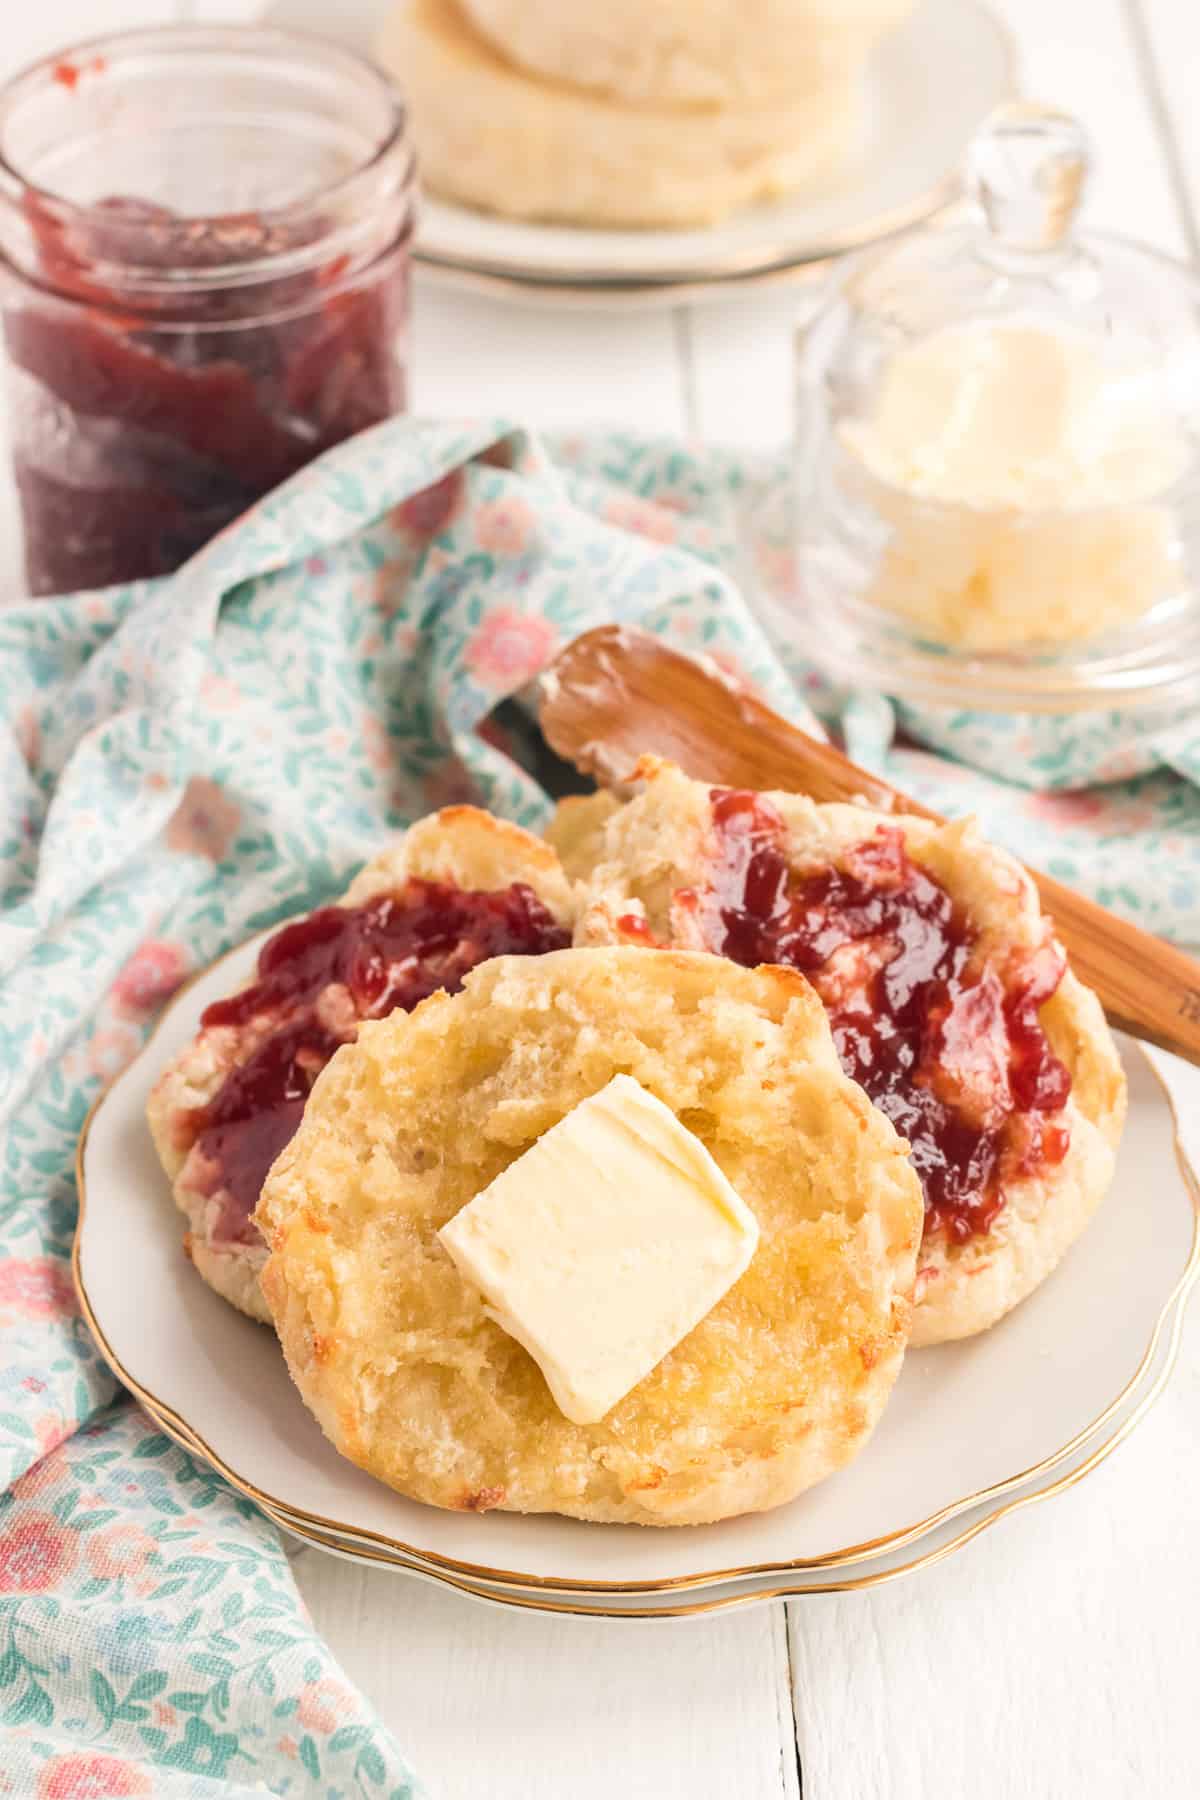 English muffins with butter and jam on plate.